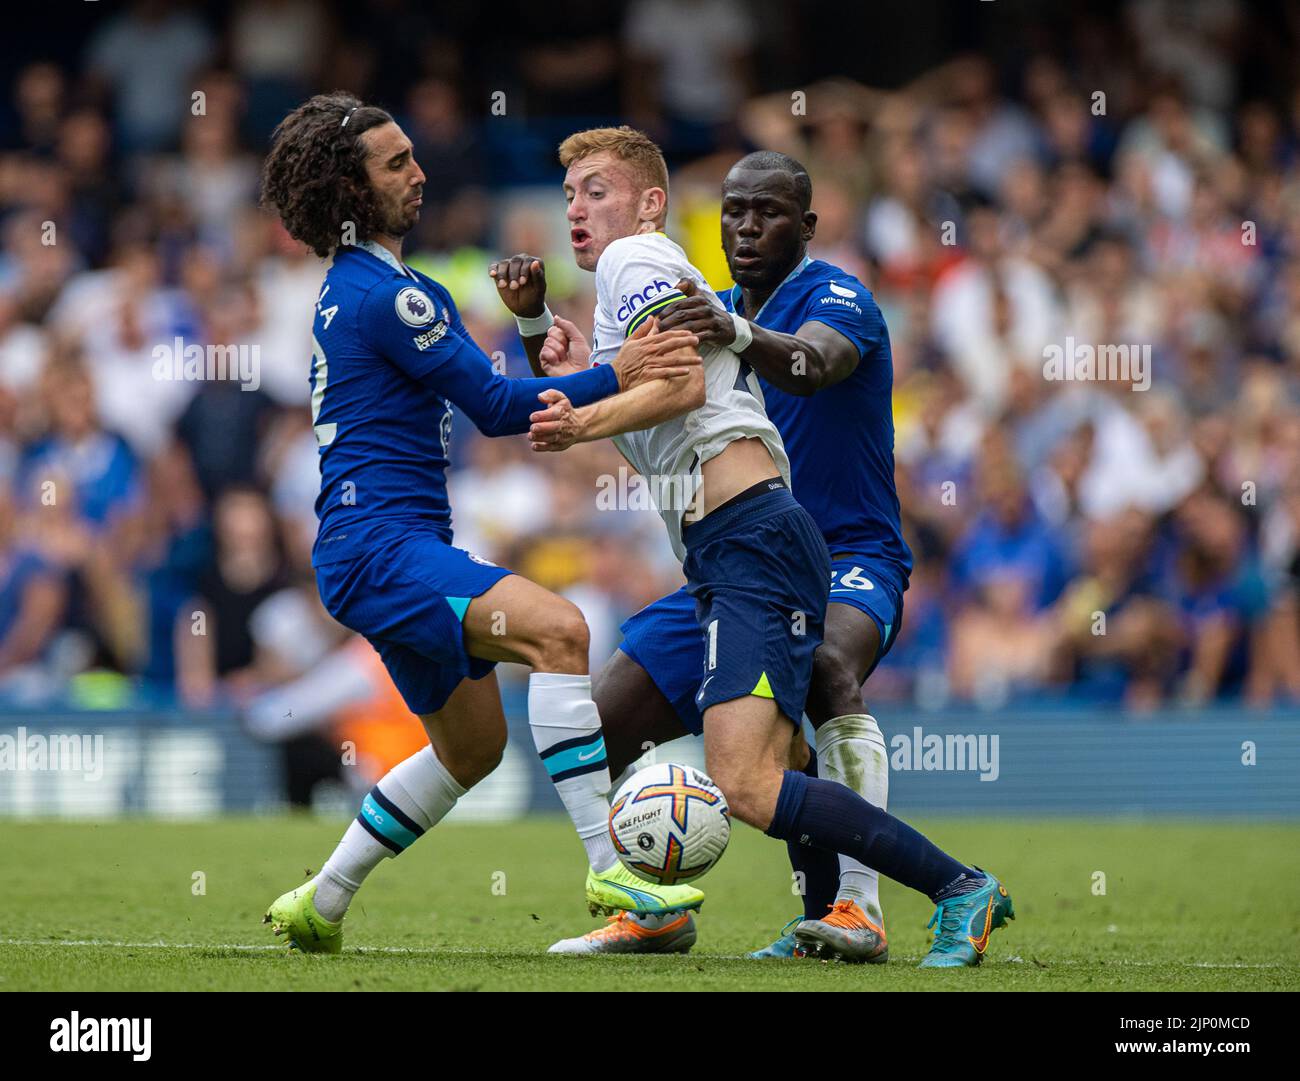 London, UK. 15th Aug, 2022. Chelsea's Marc Cucurella (L) and Kalidou Koulibaly (R) challenge Tottenham Hotspur's Dejan Kulusevski during the English Premier League match between Chelsea and Tottenham Hotspur in London, Britain, on Aug. 14, 2022. The game ended in a 2-2 draw. Credit: Xinhua/Alamy Live News Stock Photo